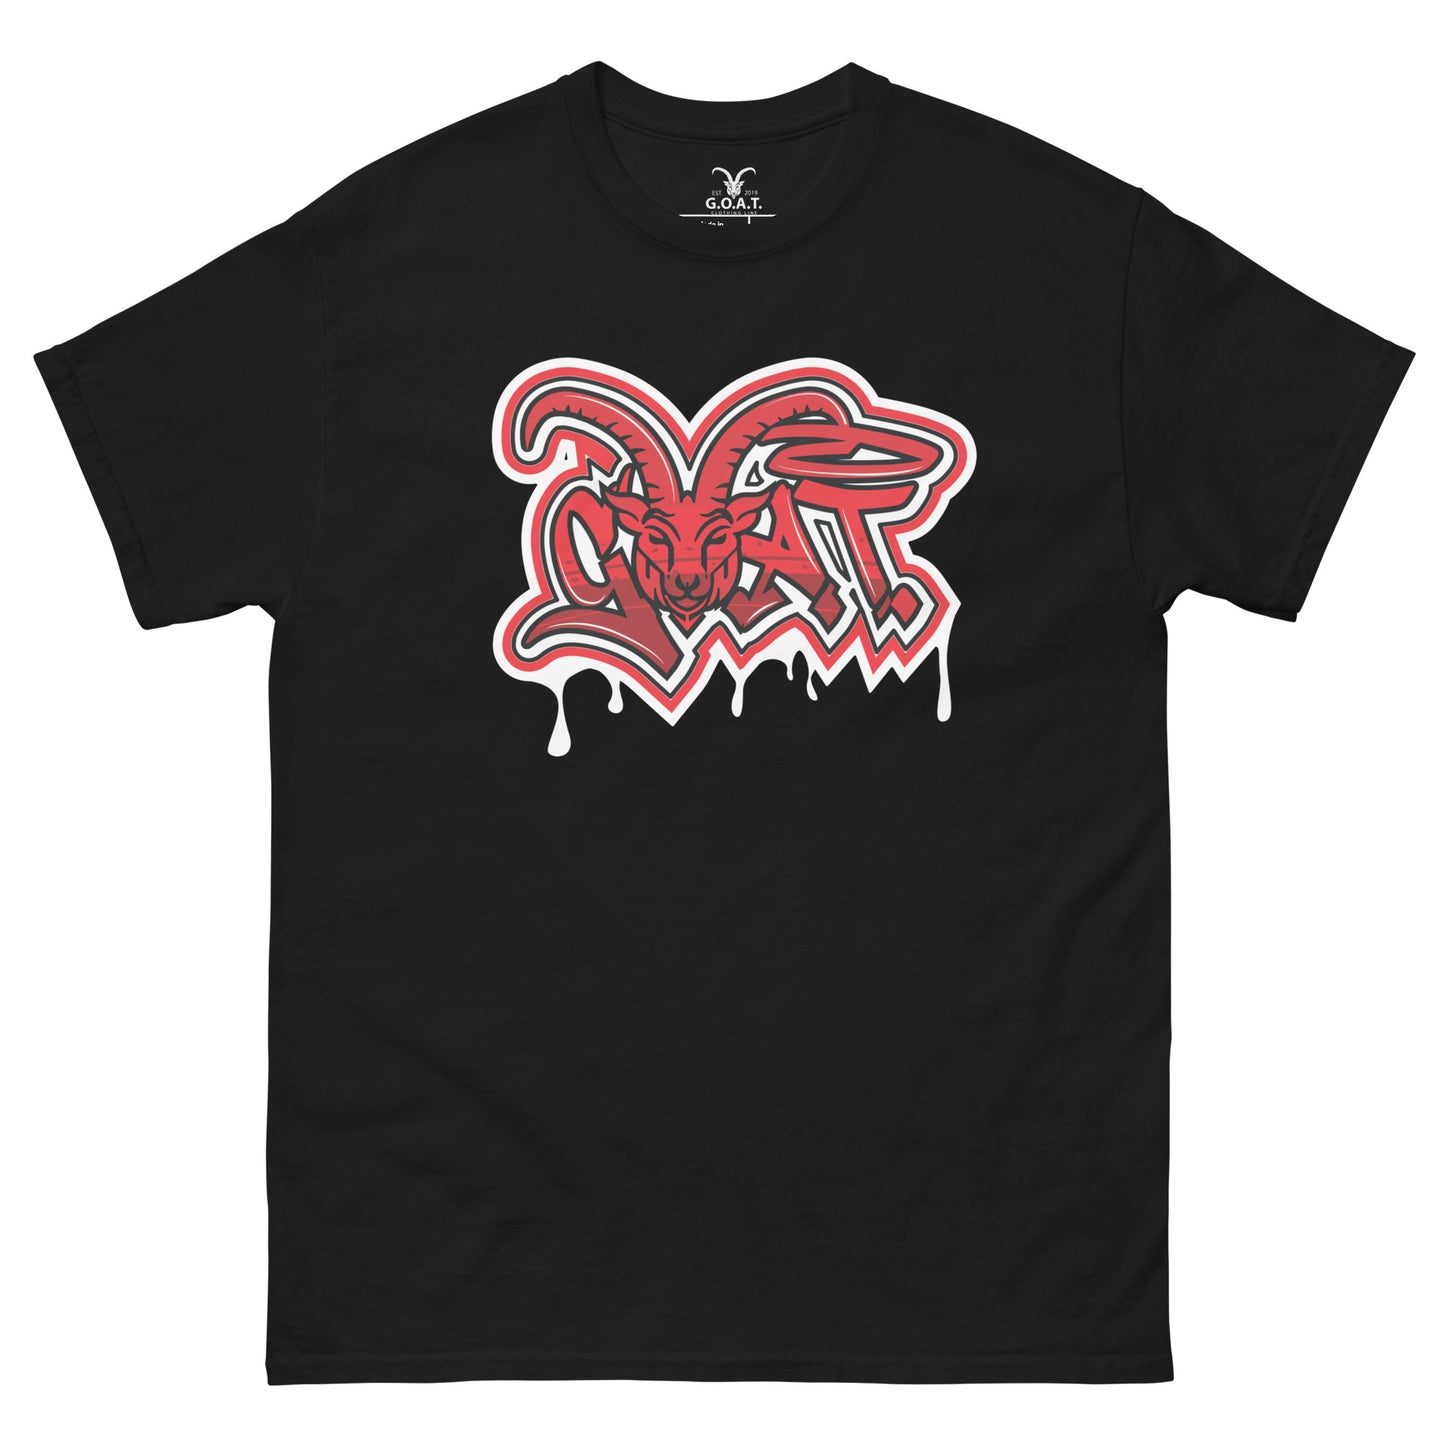 G.O.A.T. Limited Edition Red/White/Black T-Shirt (3 Colors)